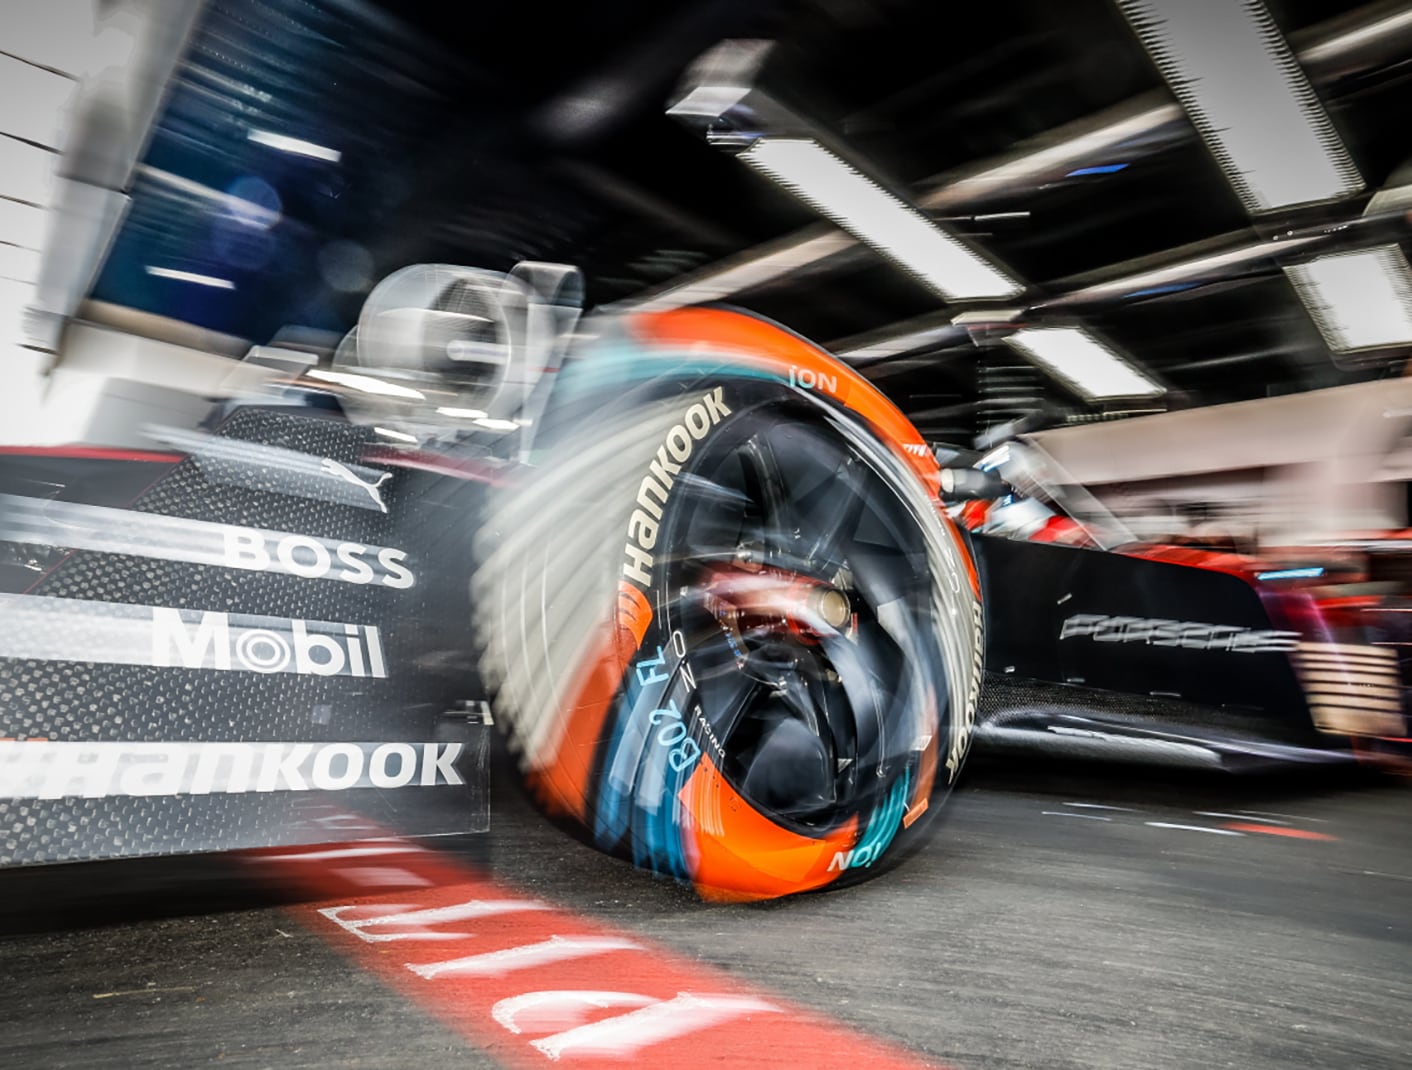 The Hankook iON Race on safari: Next stop Cape Town, South Africa, for Formula E